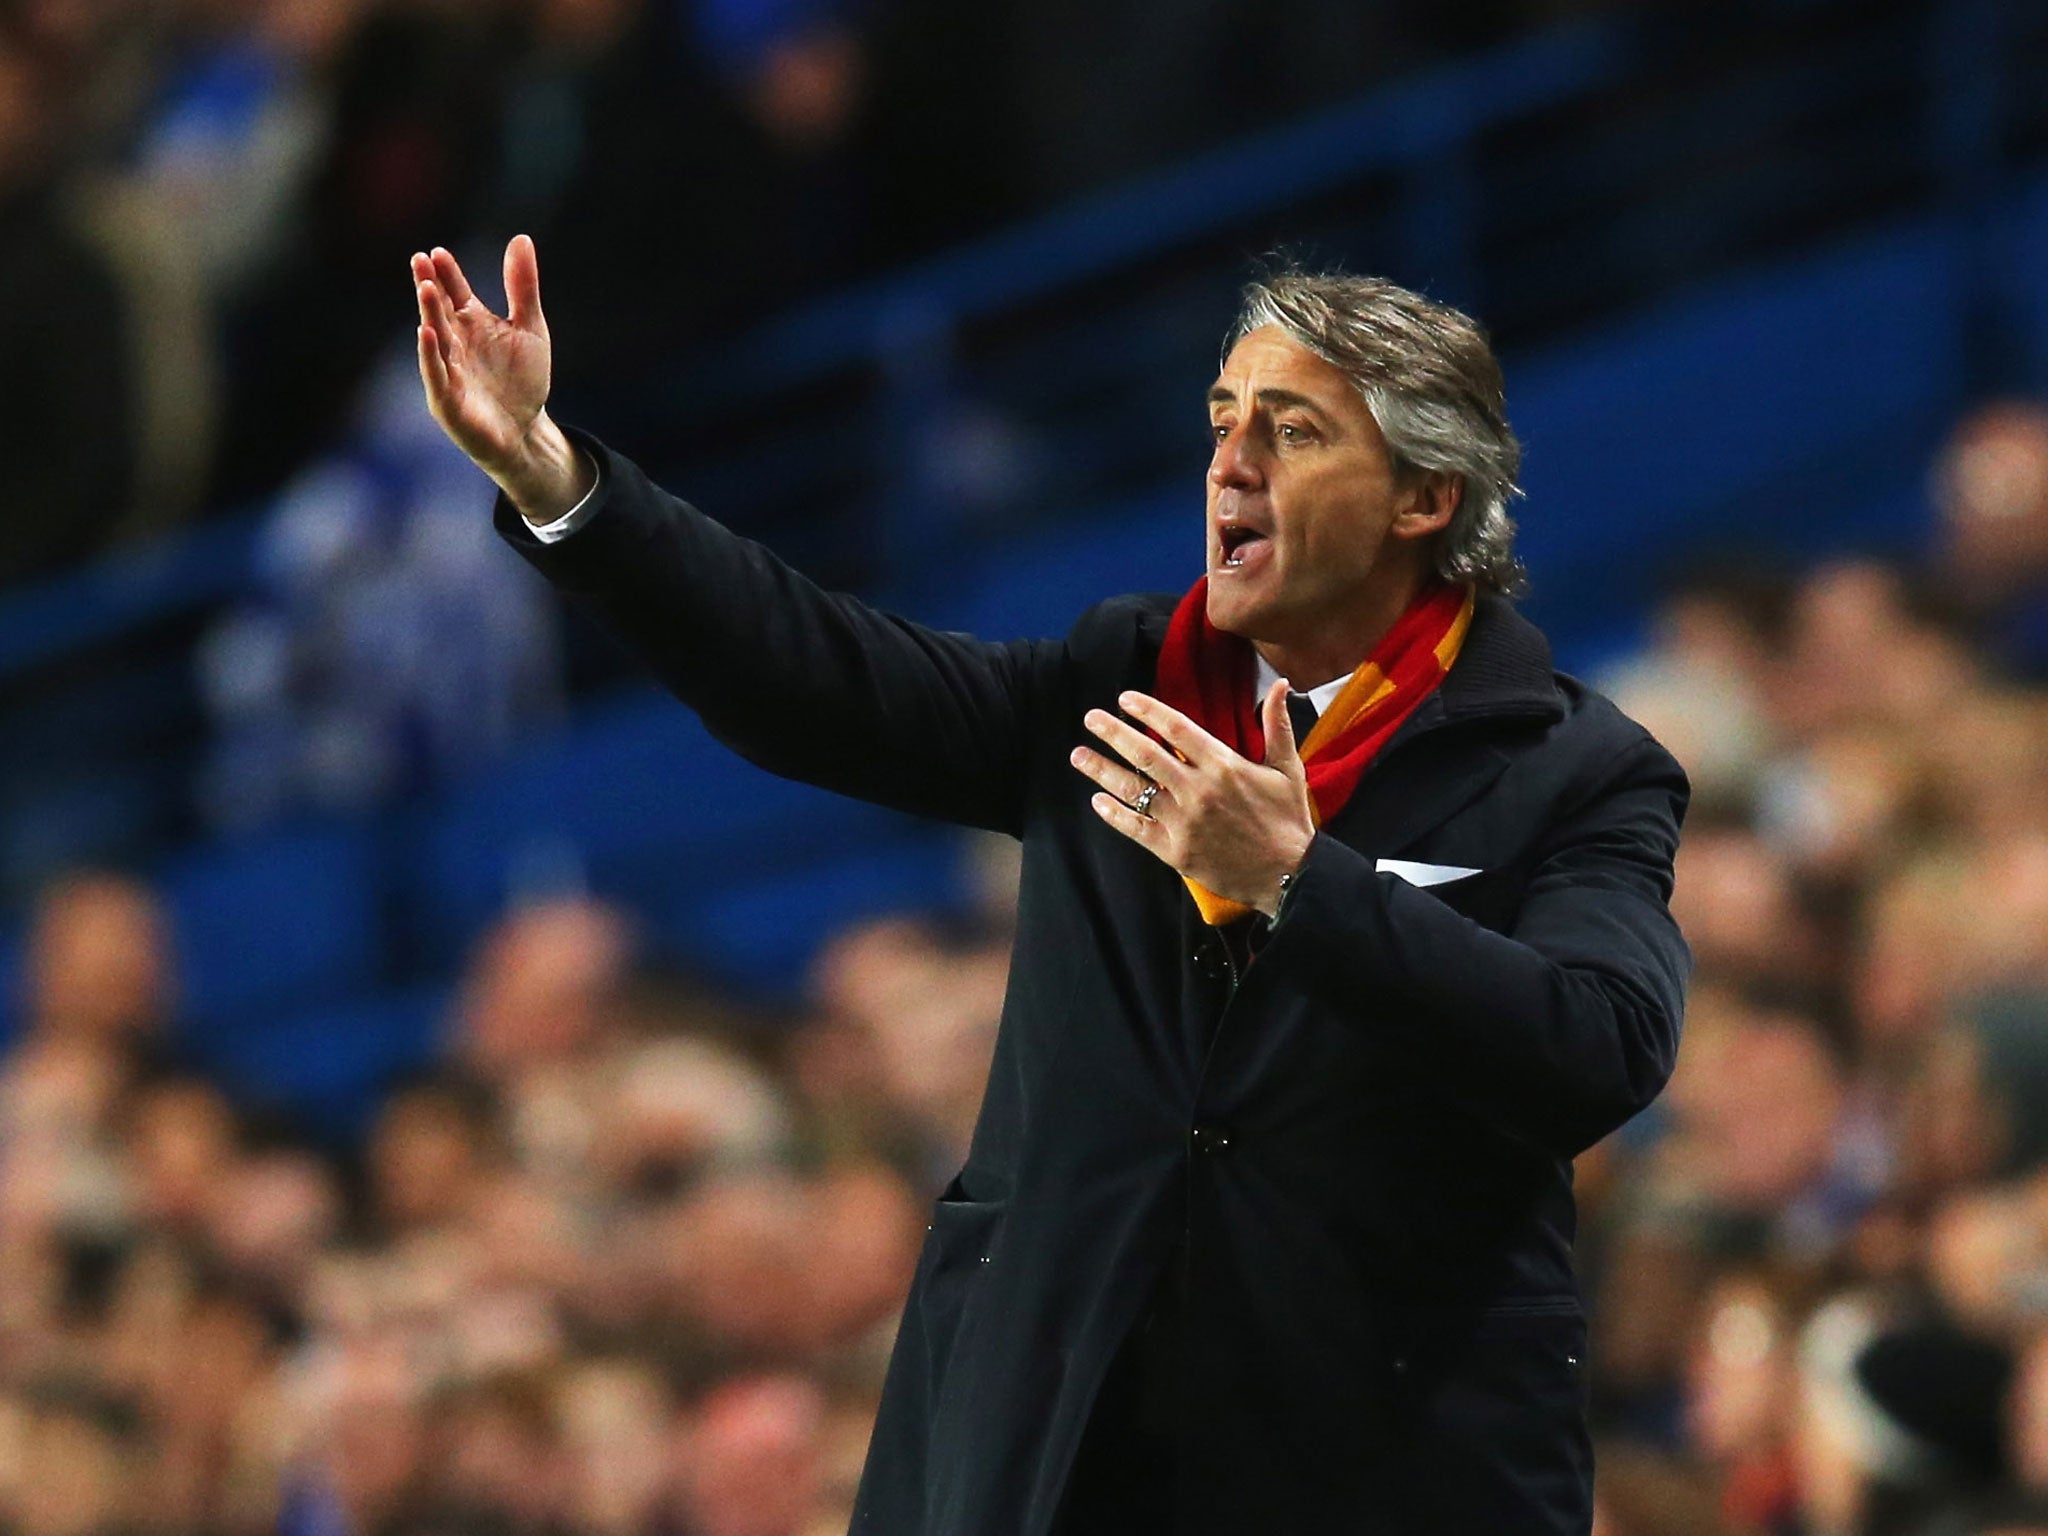 Roberto Mancini makes a gesture from the touchline at Stamford Bridge